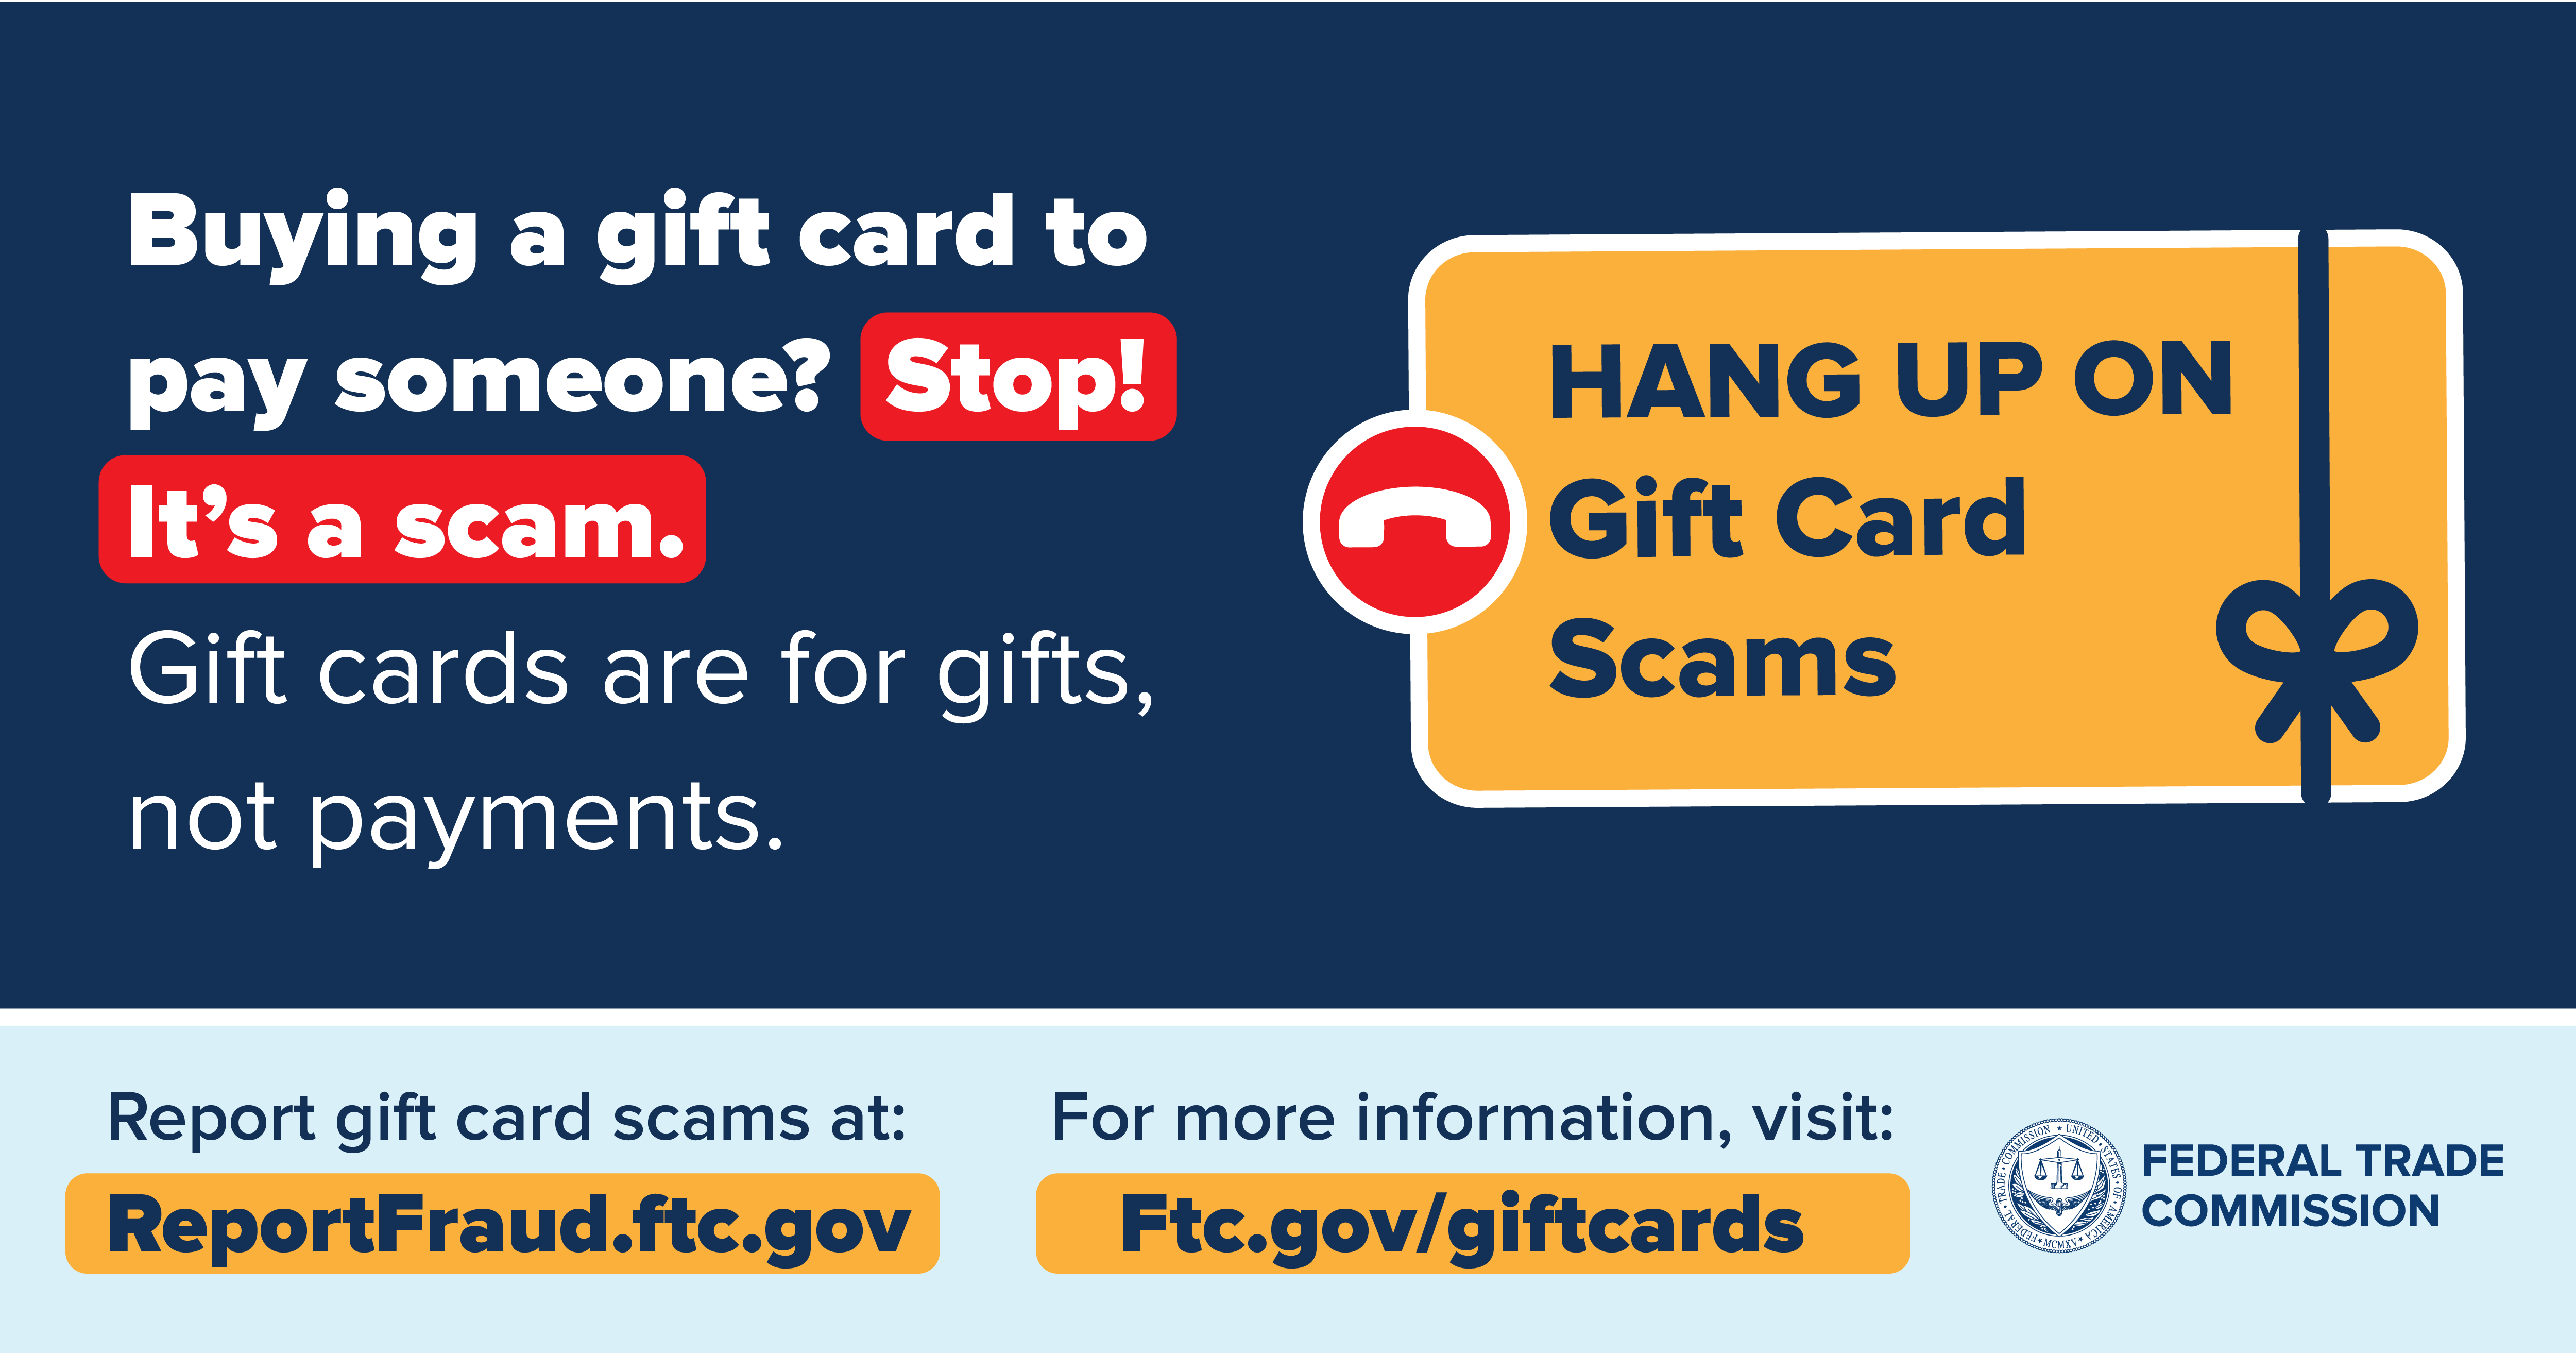 gift card scam prevention graphic from Federal Trade Commission (FTC.gov)